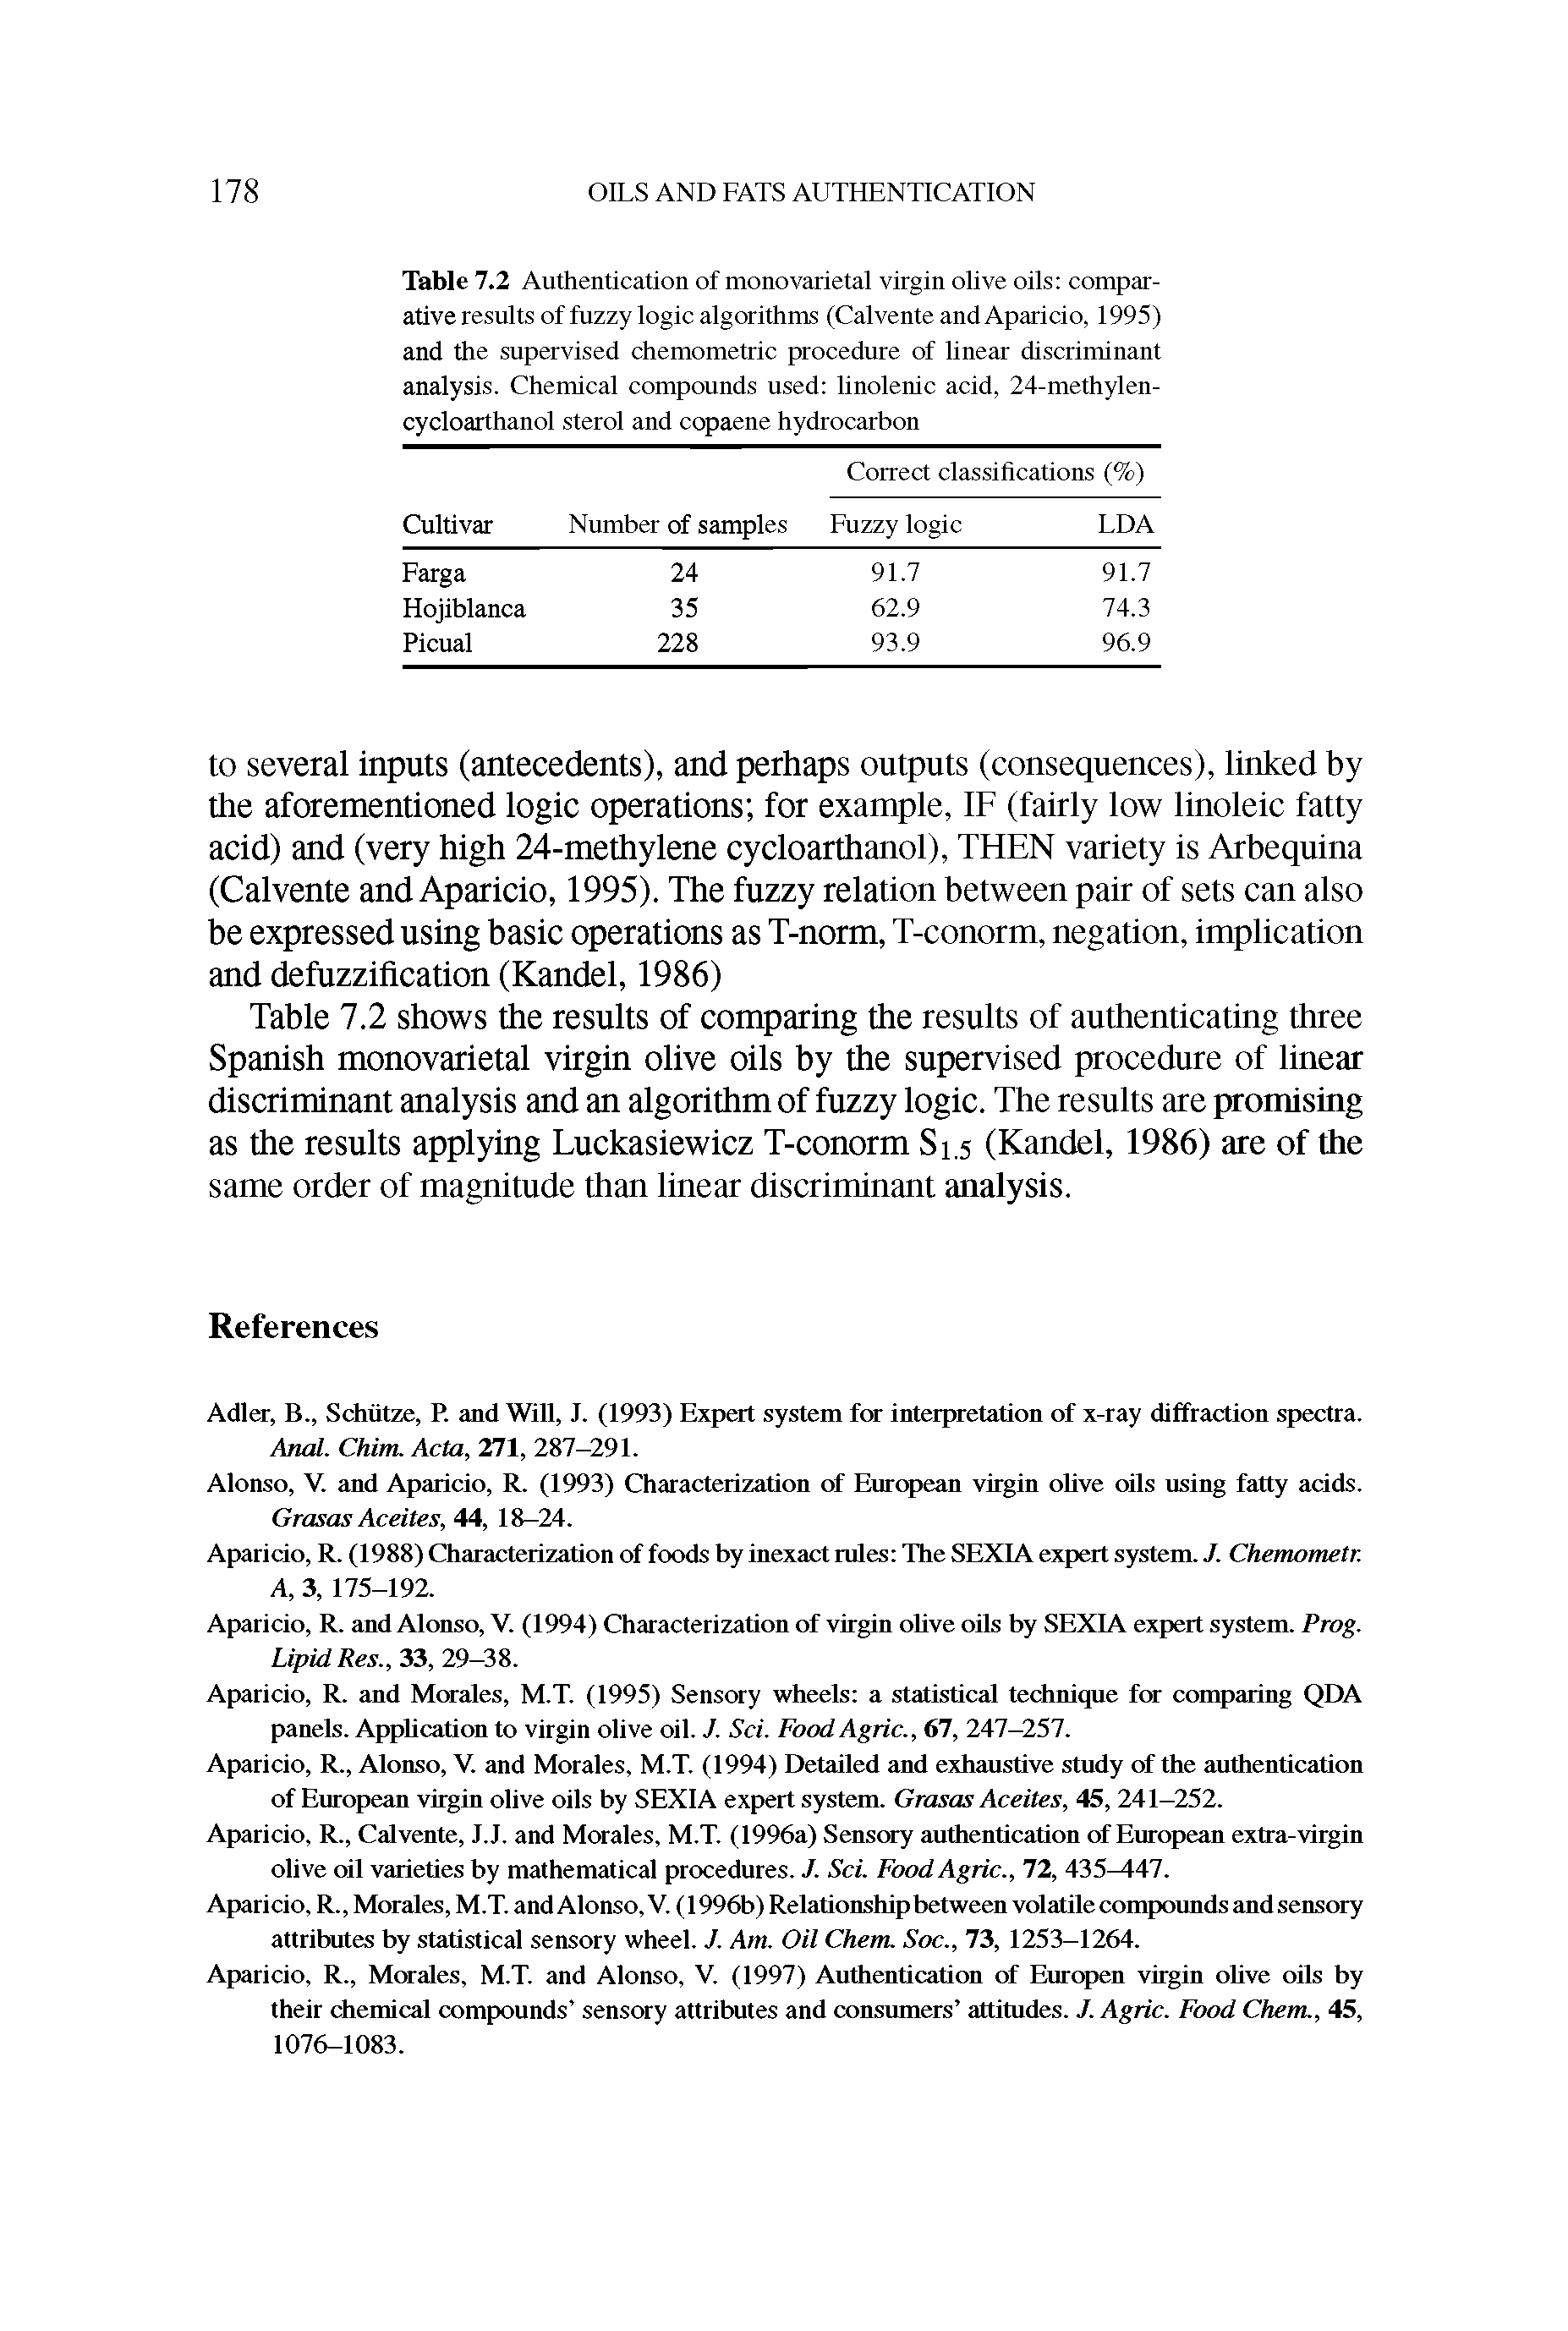 Table 7.2 Authentication of mono varietal virgin olive oils comparative results of fuzzy logic algorithms (Calvente and Aparicio, 1995) and the supervised chemometric procedure of linear discriminant analysis. Chemical compounds used linolenic acid, 24-methylen-cycloarthanol sterol and copaene hydrocarbon...